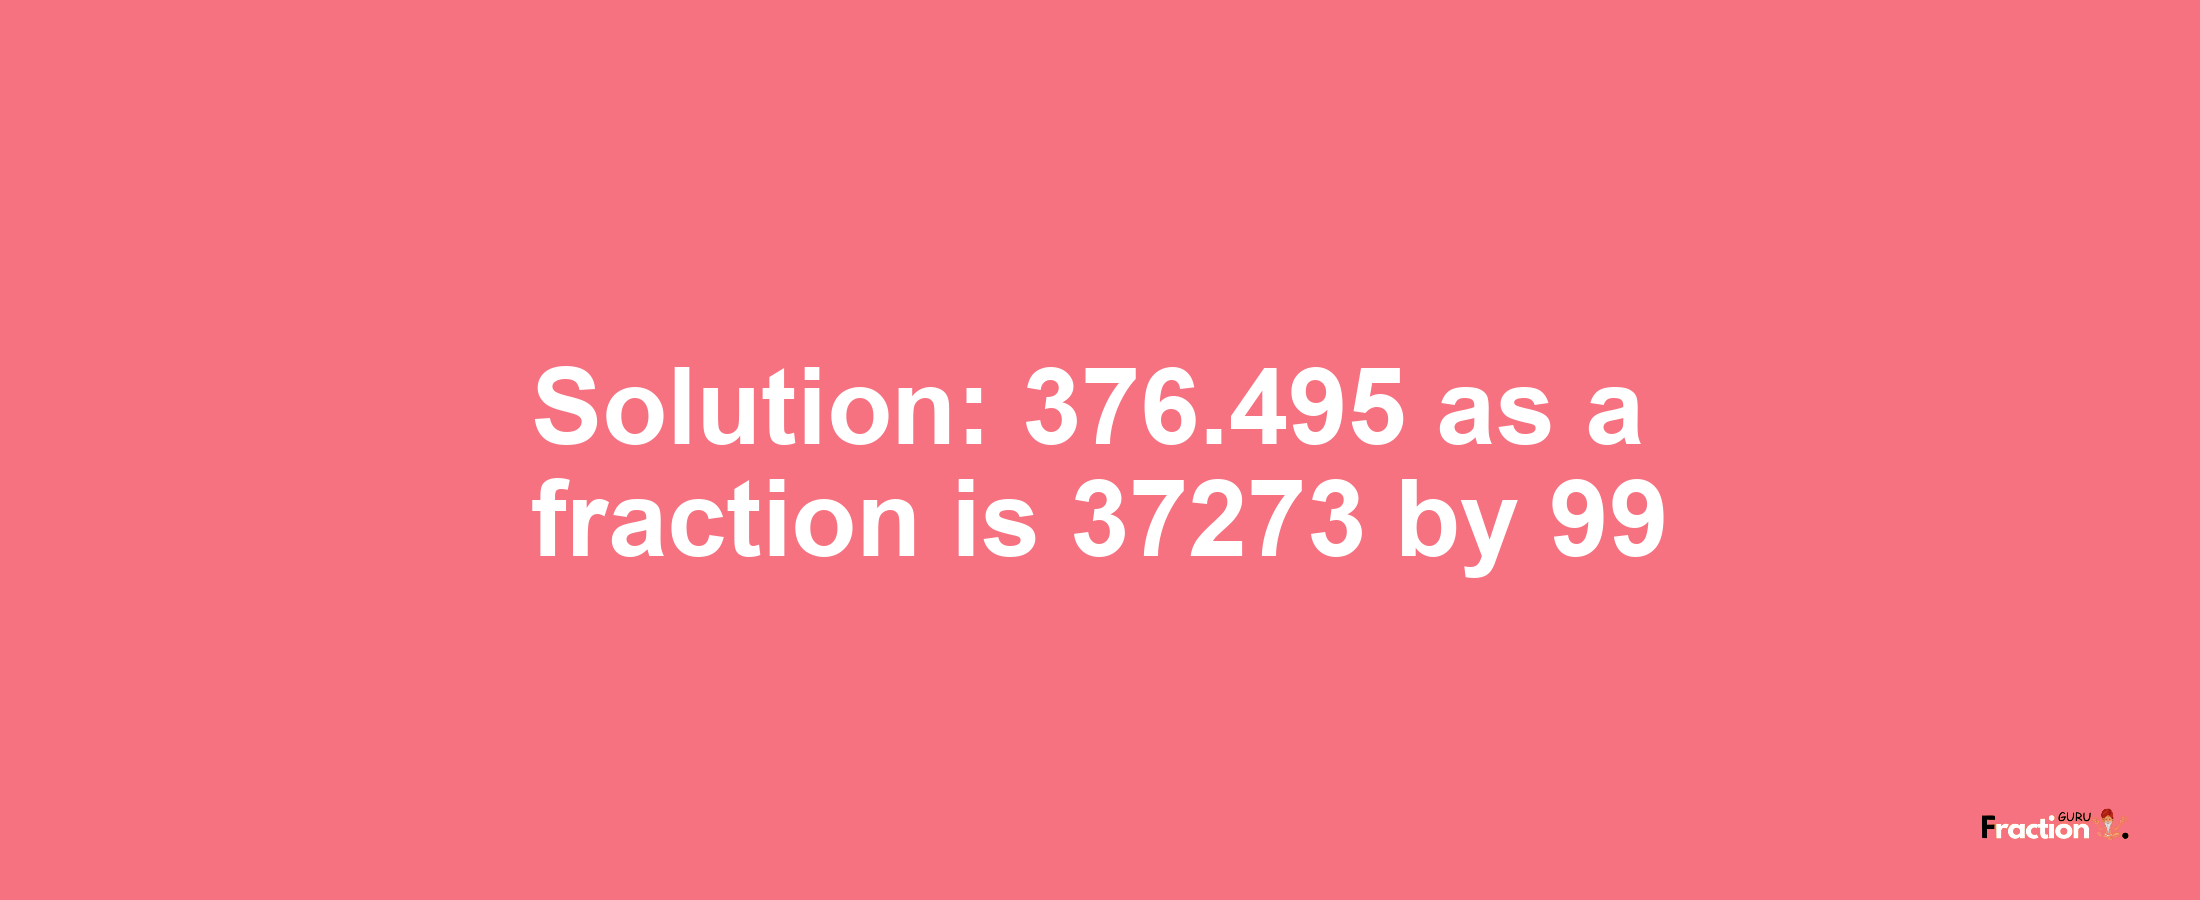 Solution:376.495 as a fraction is 37273/99